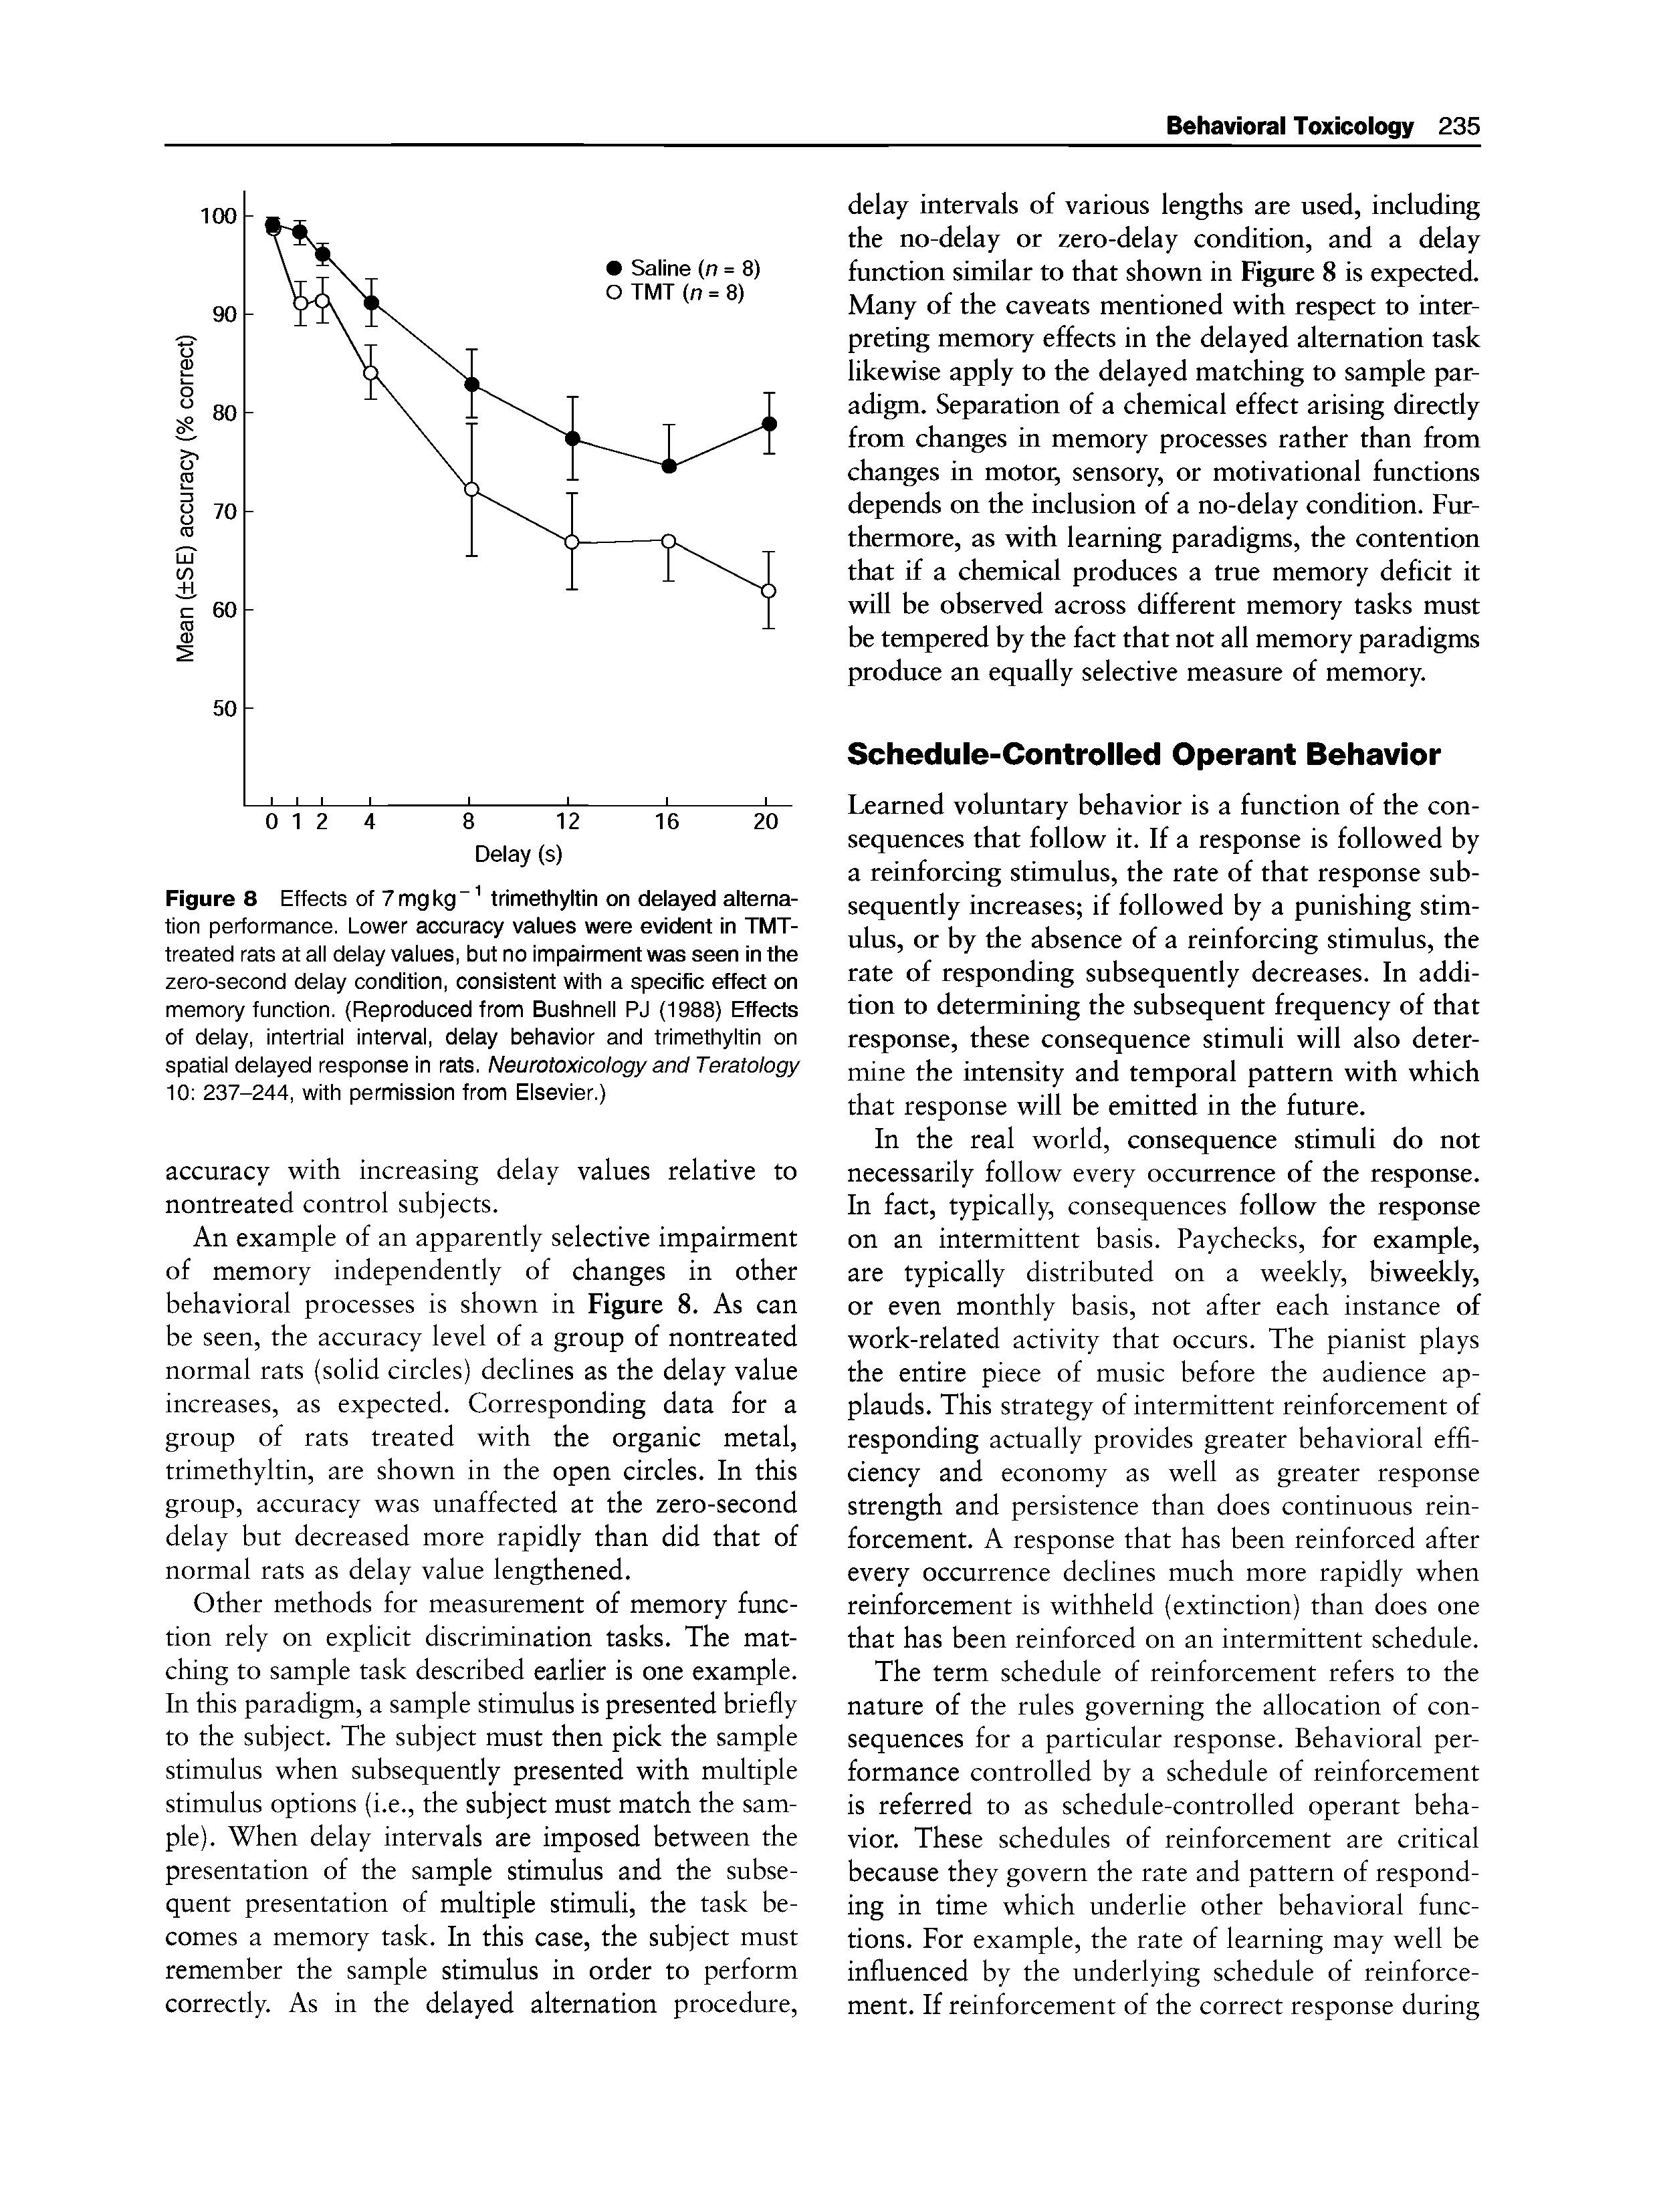 Figure 8 Effects of 7 mg kg trimethyltin on delayed alternation performance. Lower accuracy values were evident in TMT-treated rats at all delay values, but no impairment was seen in the zero-second delay condition, consistent with a specific effect on memory function. (Reproduced from Bushnell PJ (1988) Effects of delay, intertrial interval, delay behavior and trimethyltin on spatial delayed response in rats. Neurotoxicology and Teratology 10 237-244, with permission from Elsevier.)...